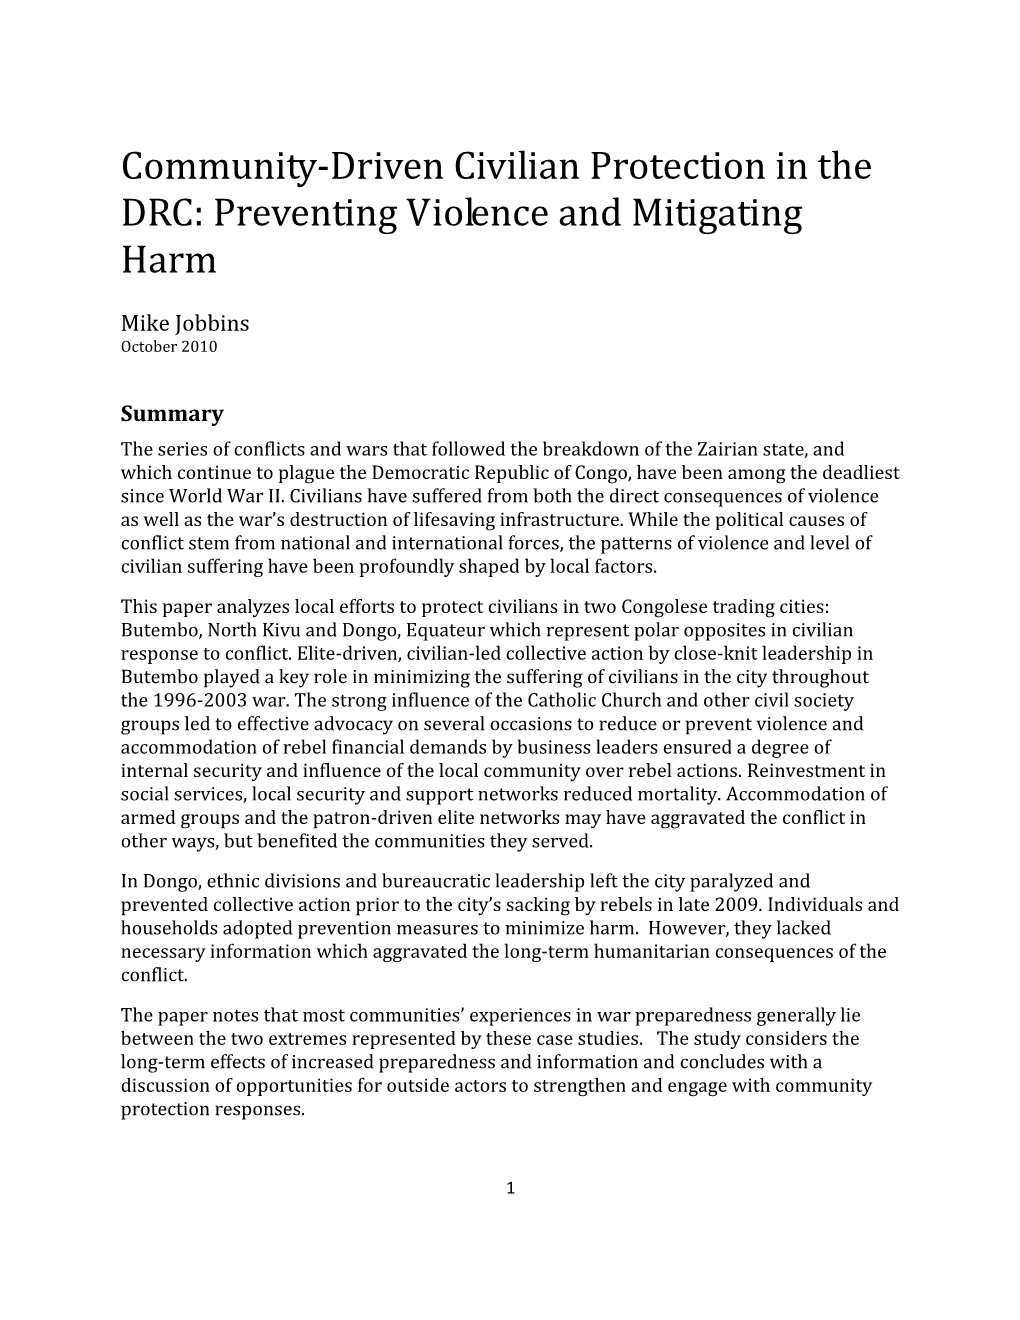 Community-Driven Civilian Protection in the DRC: Preventing Violence and Mitigating Harm